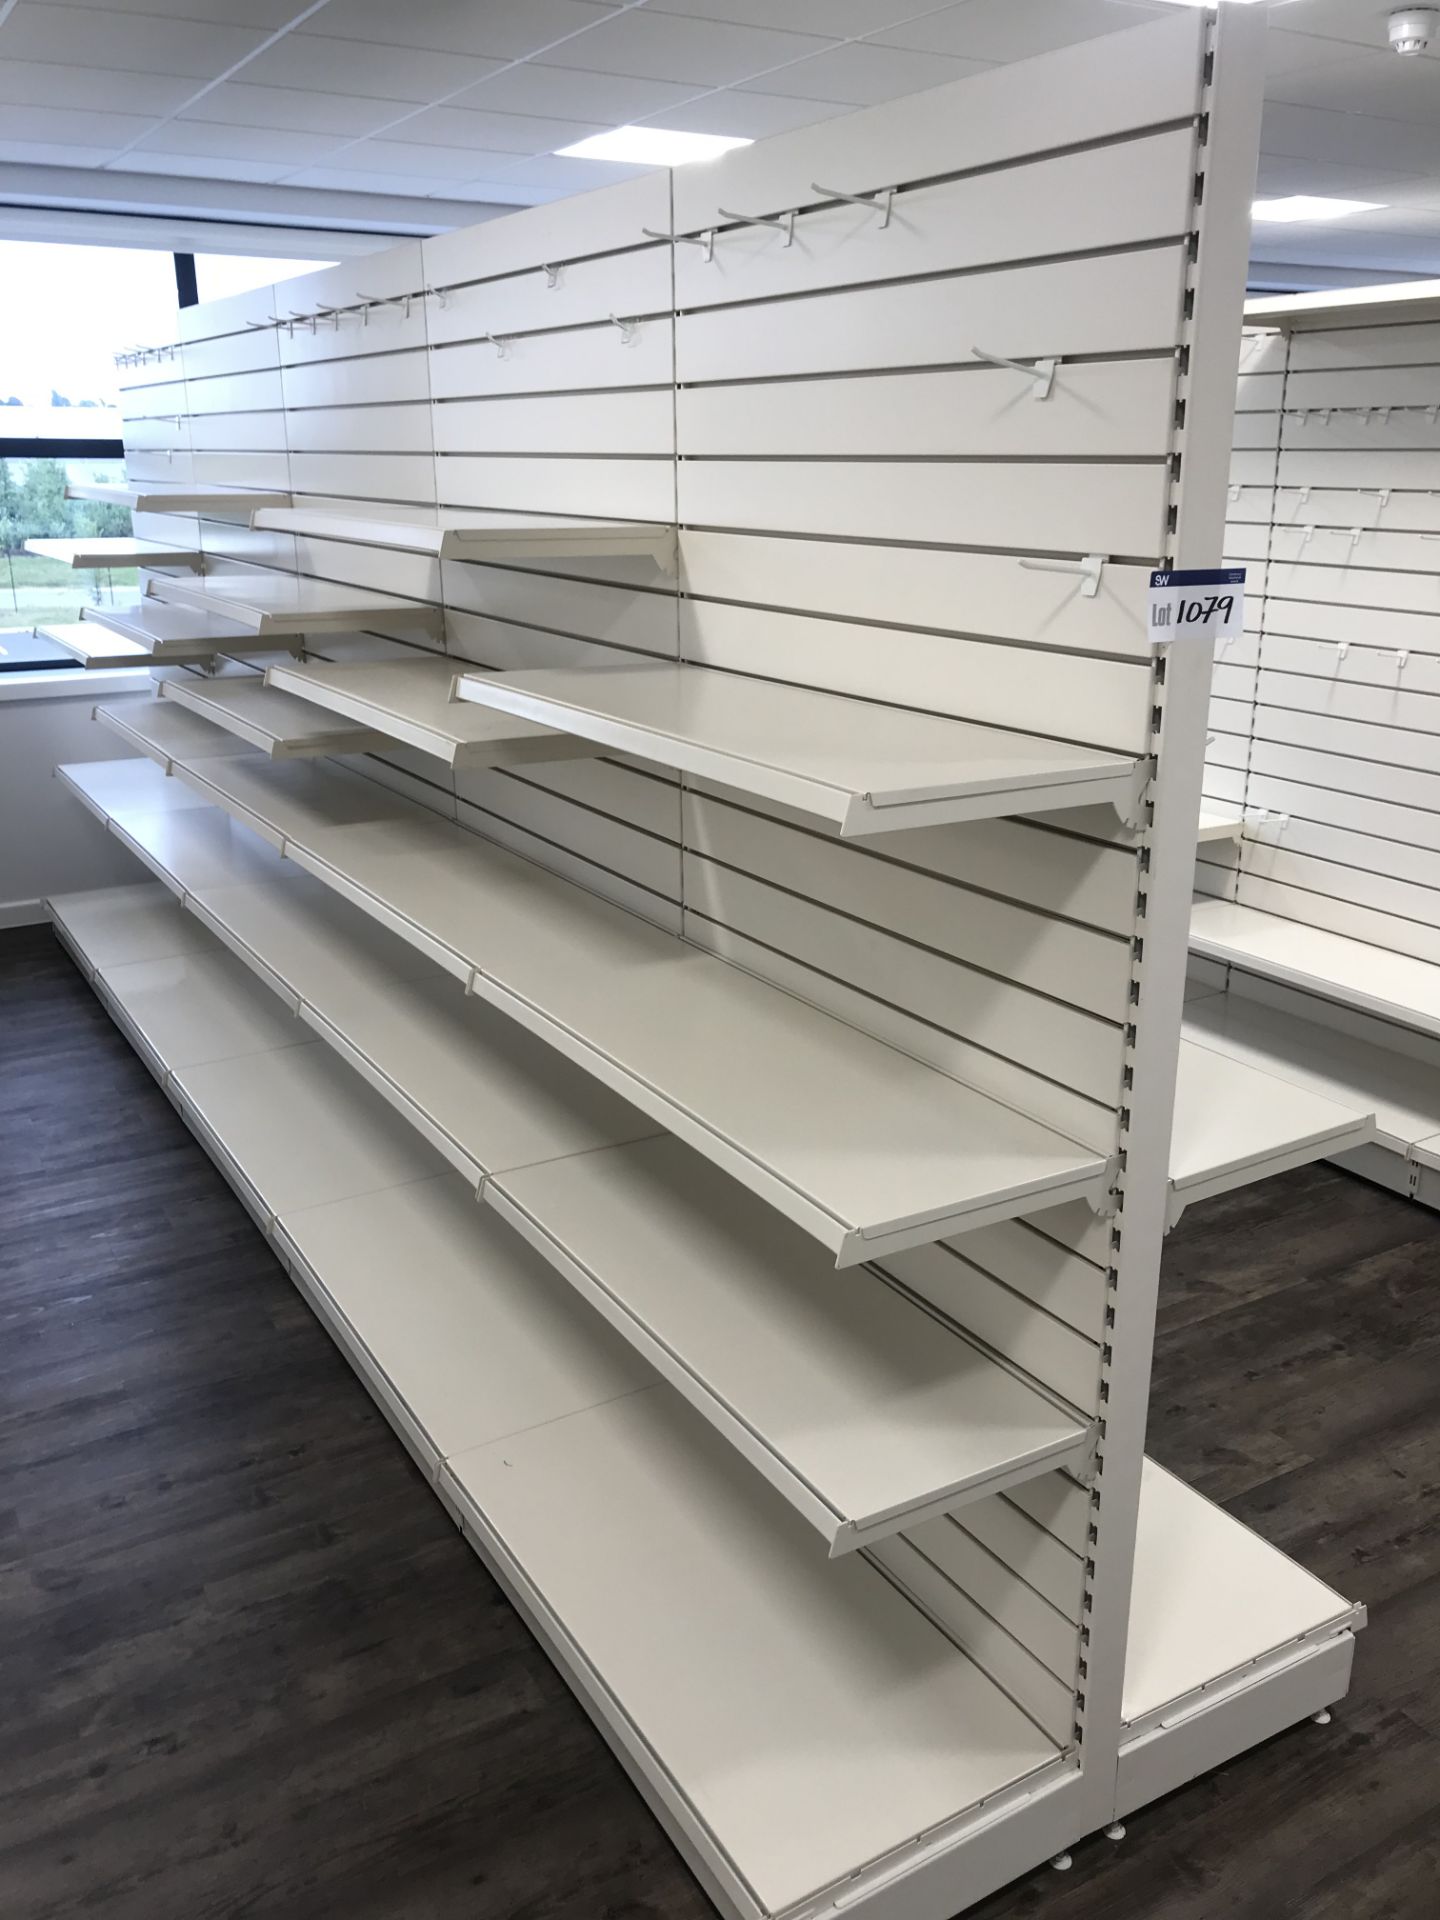 5 x Bays of Cantilever Shelving